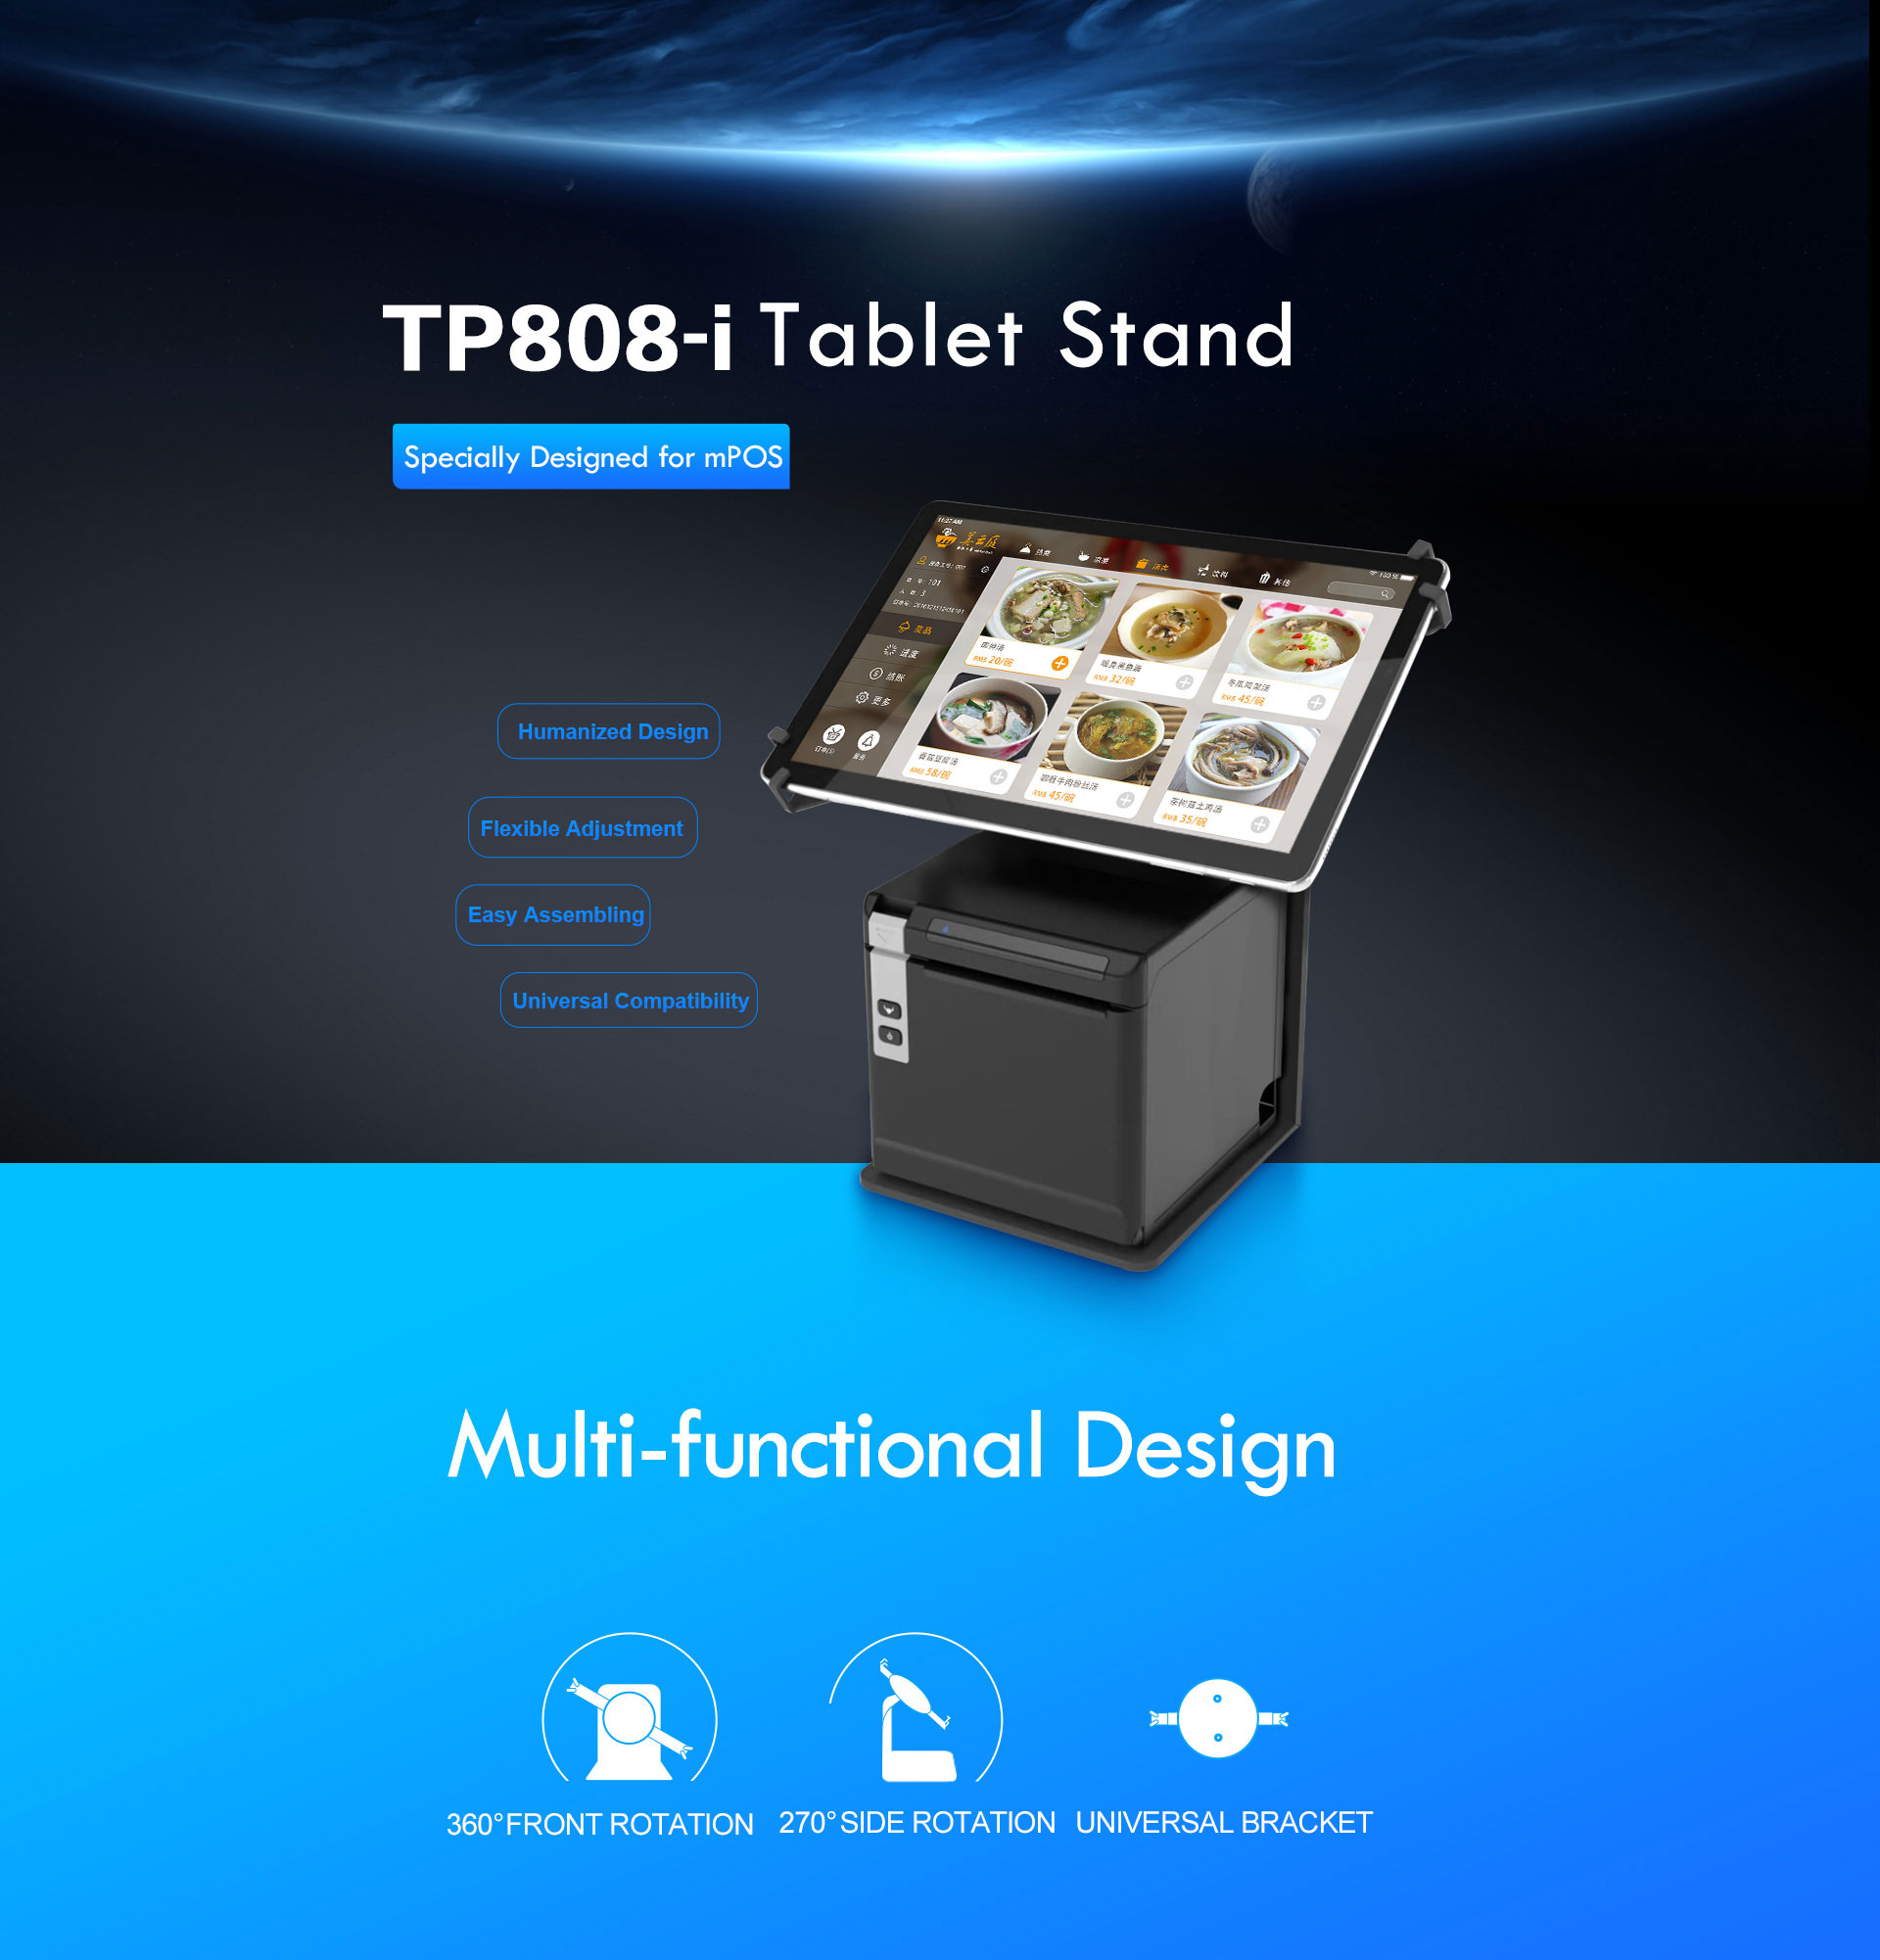 HPRT multifunction receipt printer tablet stand TP808-i